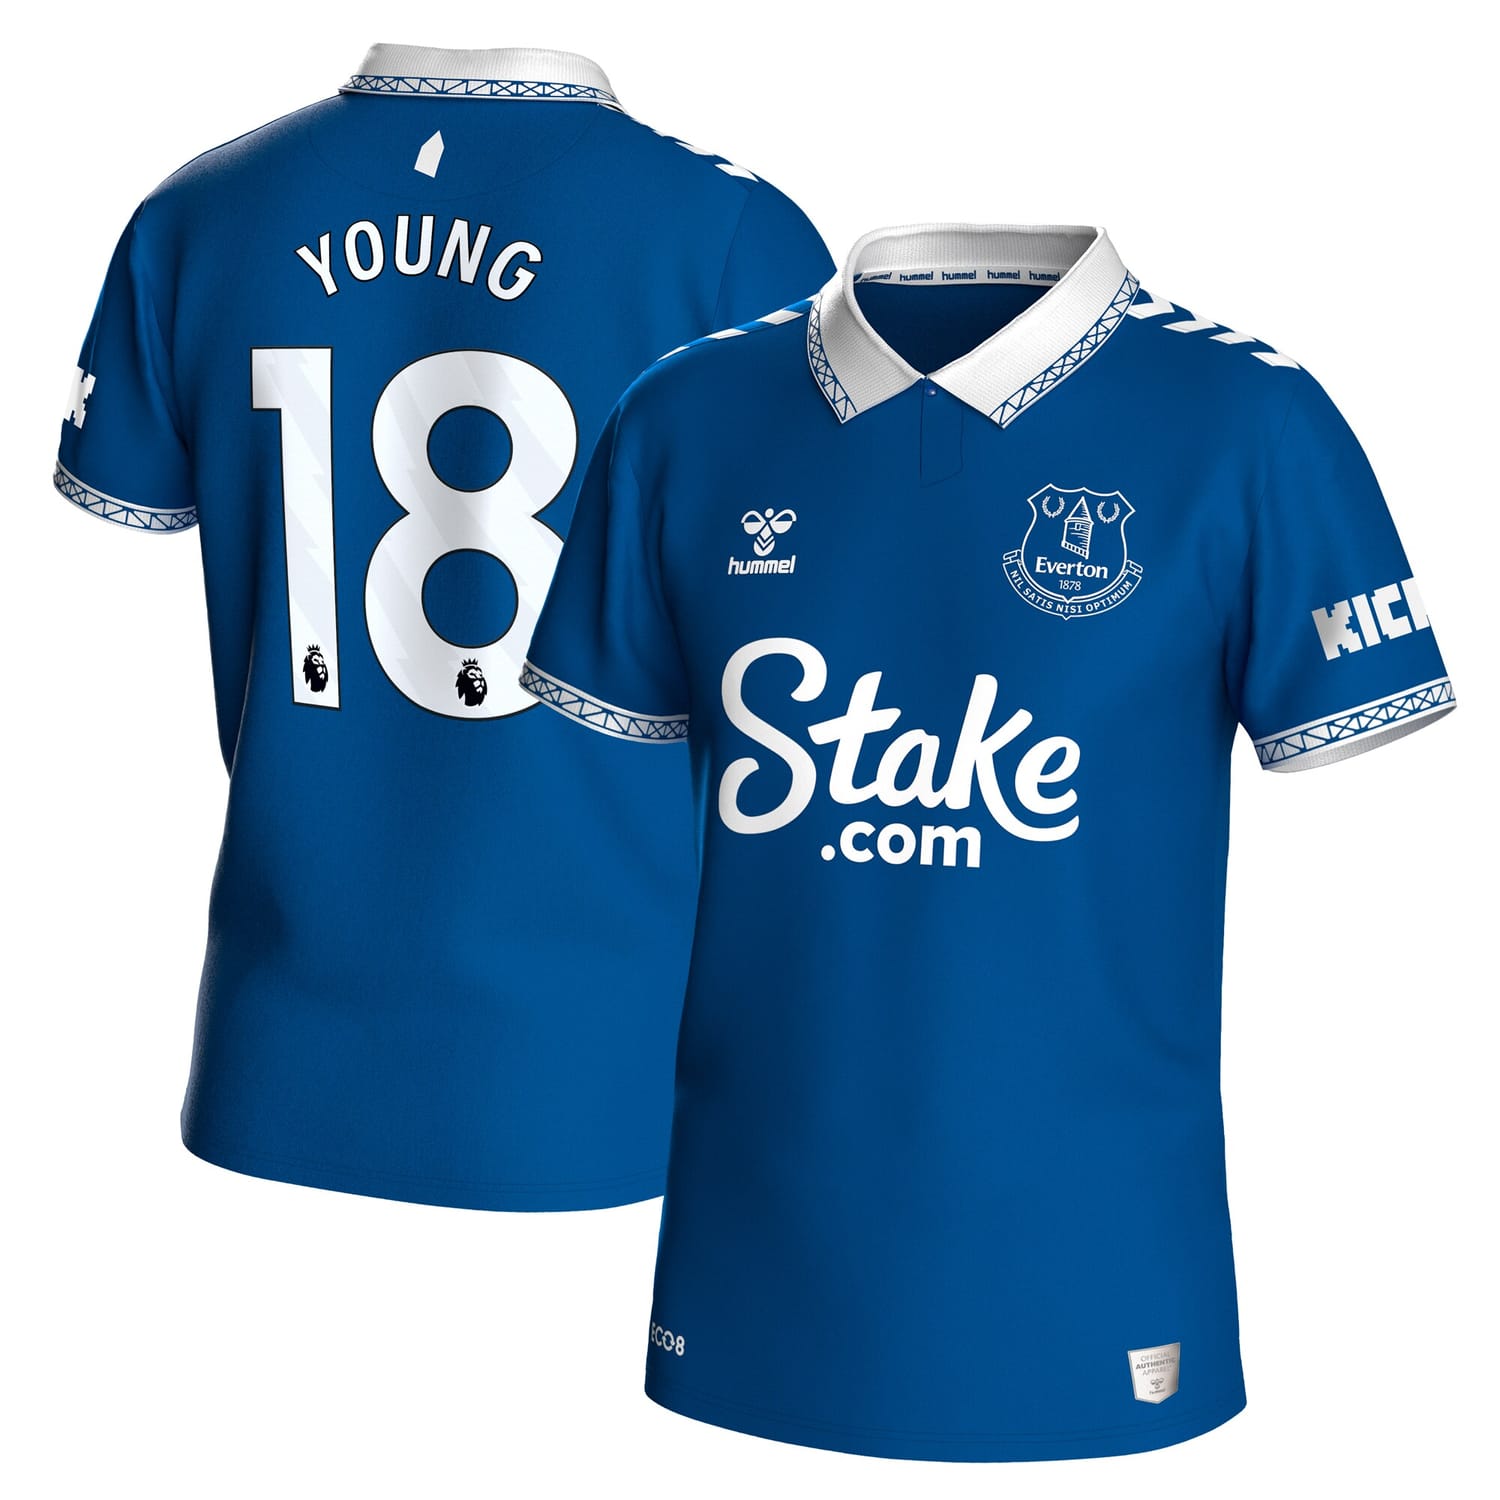 Premier League Everton Home Jersey Shirt 2023-24 player Young 18 printing for Men